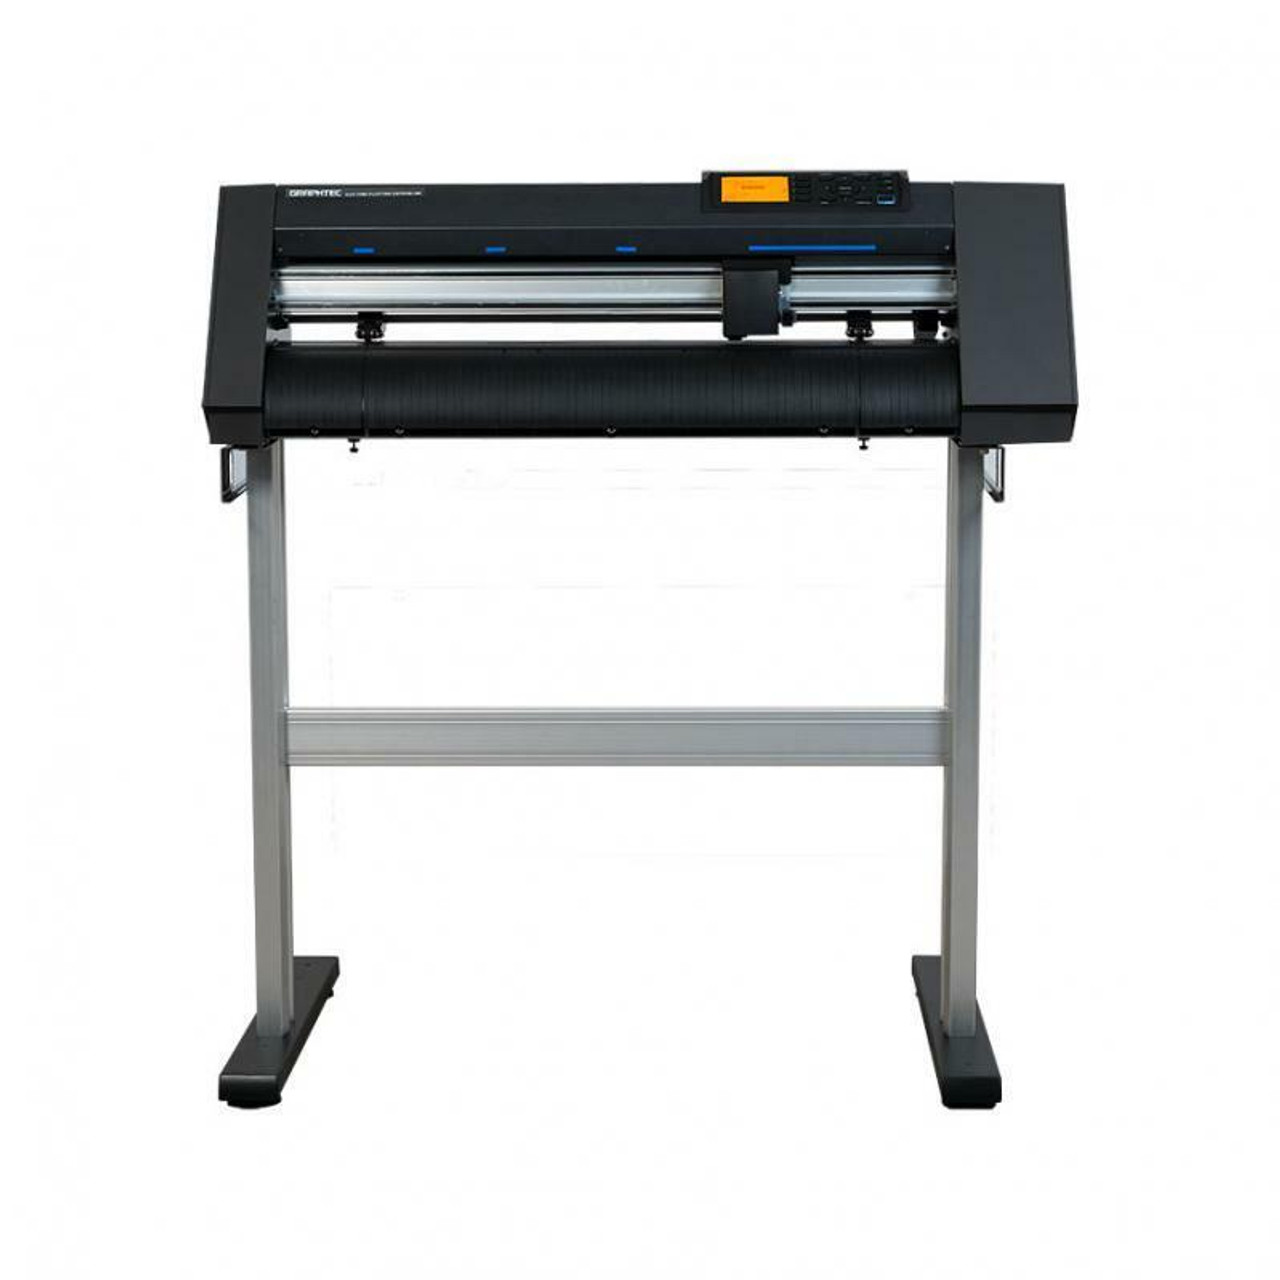 ST-24 Electronic Stencil Cutter